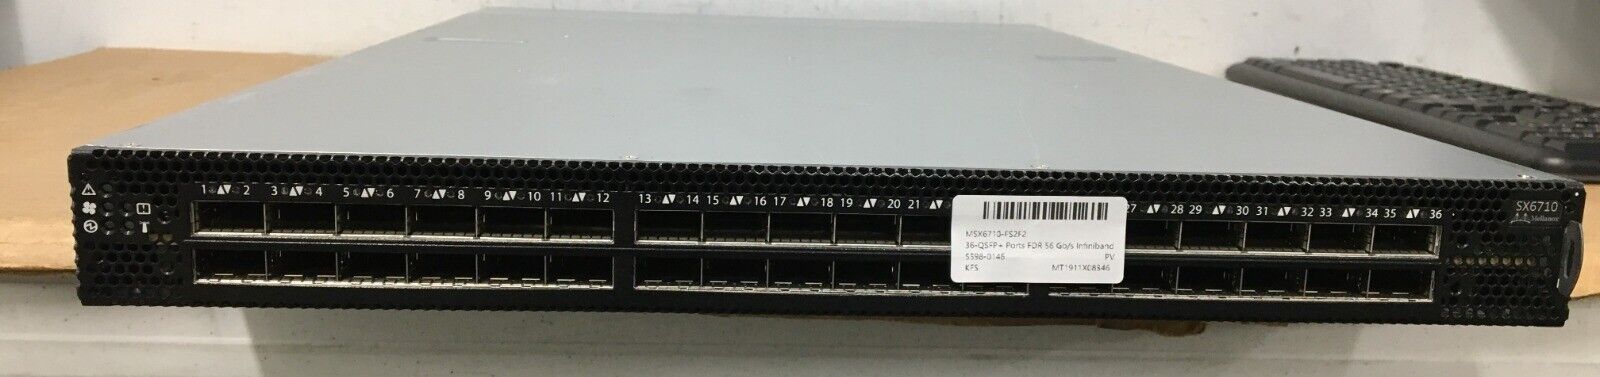 MELLANOX MSX6710-FS2F2 36-QSFP+ Ports FDR 56 Gb/s Infiniband Switch - Unit Only